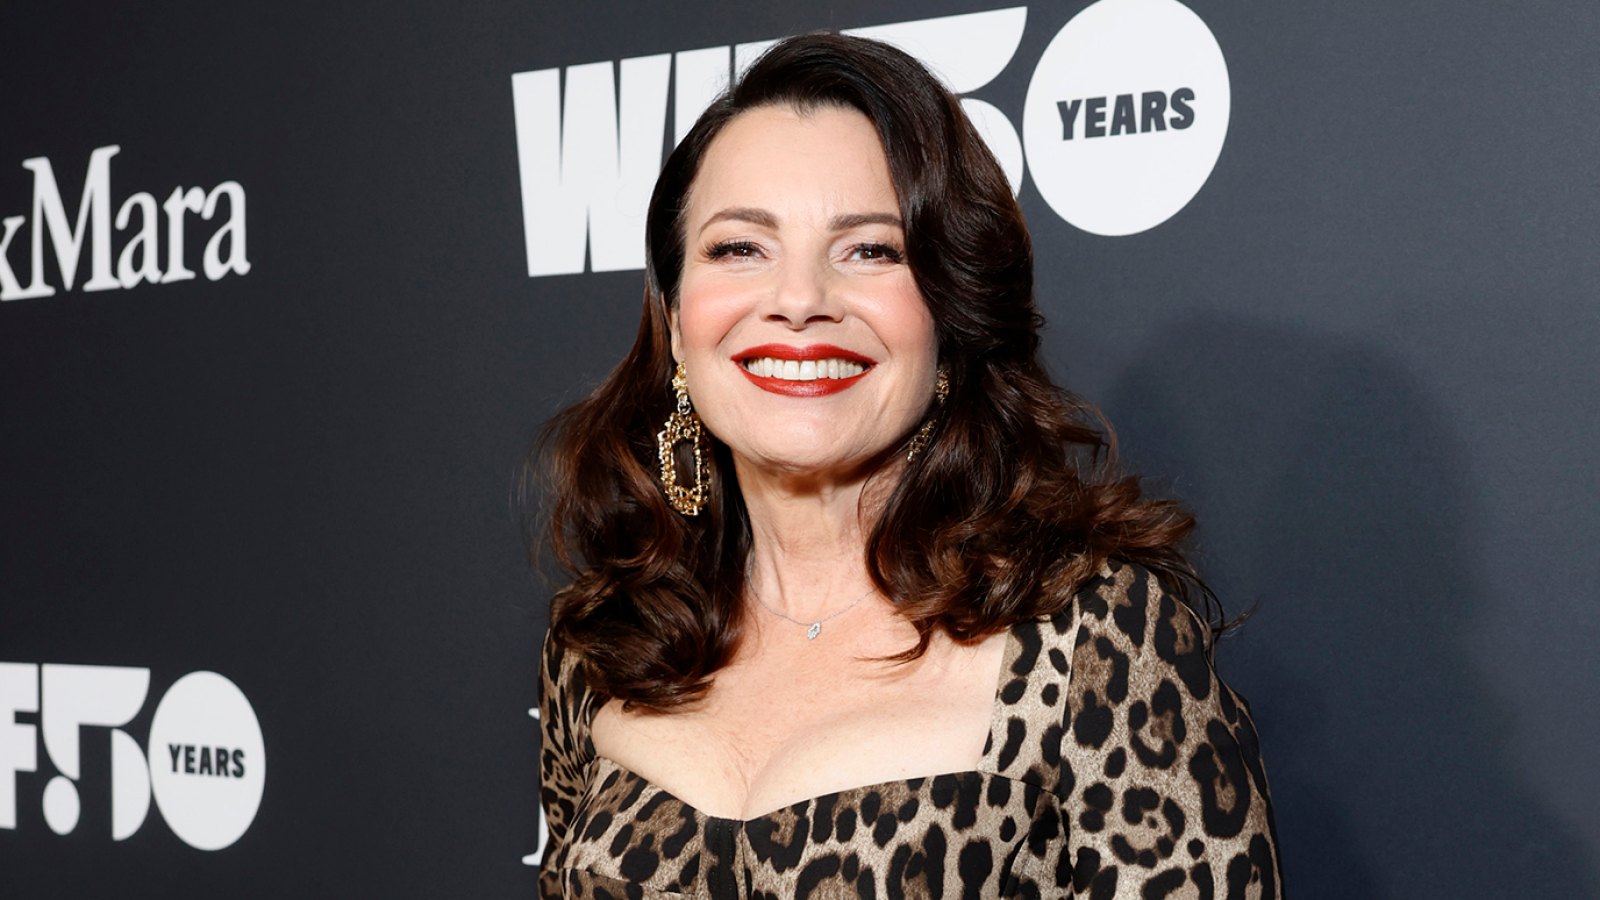 Fran Drescher at the WIF Honors Celebrating 50 Years Presented by Max Mara in Hollywood, CA on November 30, 2023.